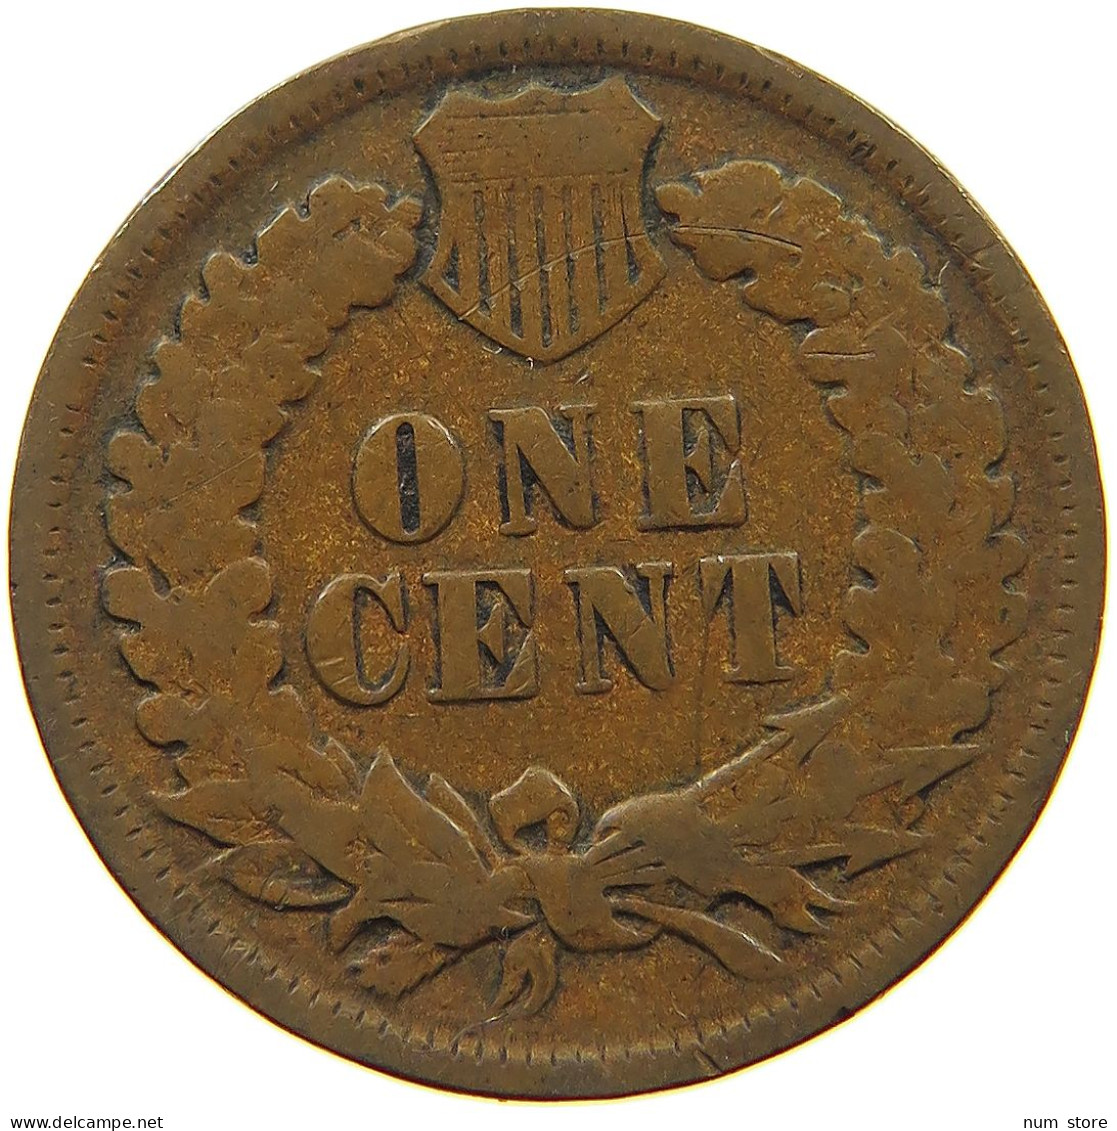 UNITED STATES OF AMERICA CENT 1895 INDIAN HEAD #s063 0171 - 1859-1909: Indian Head